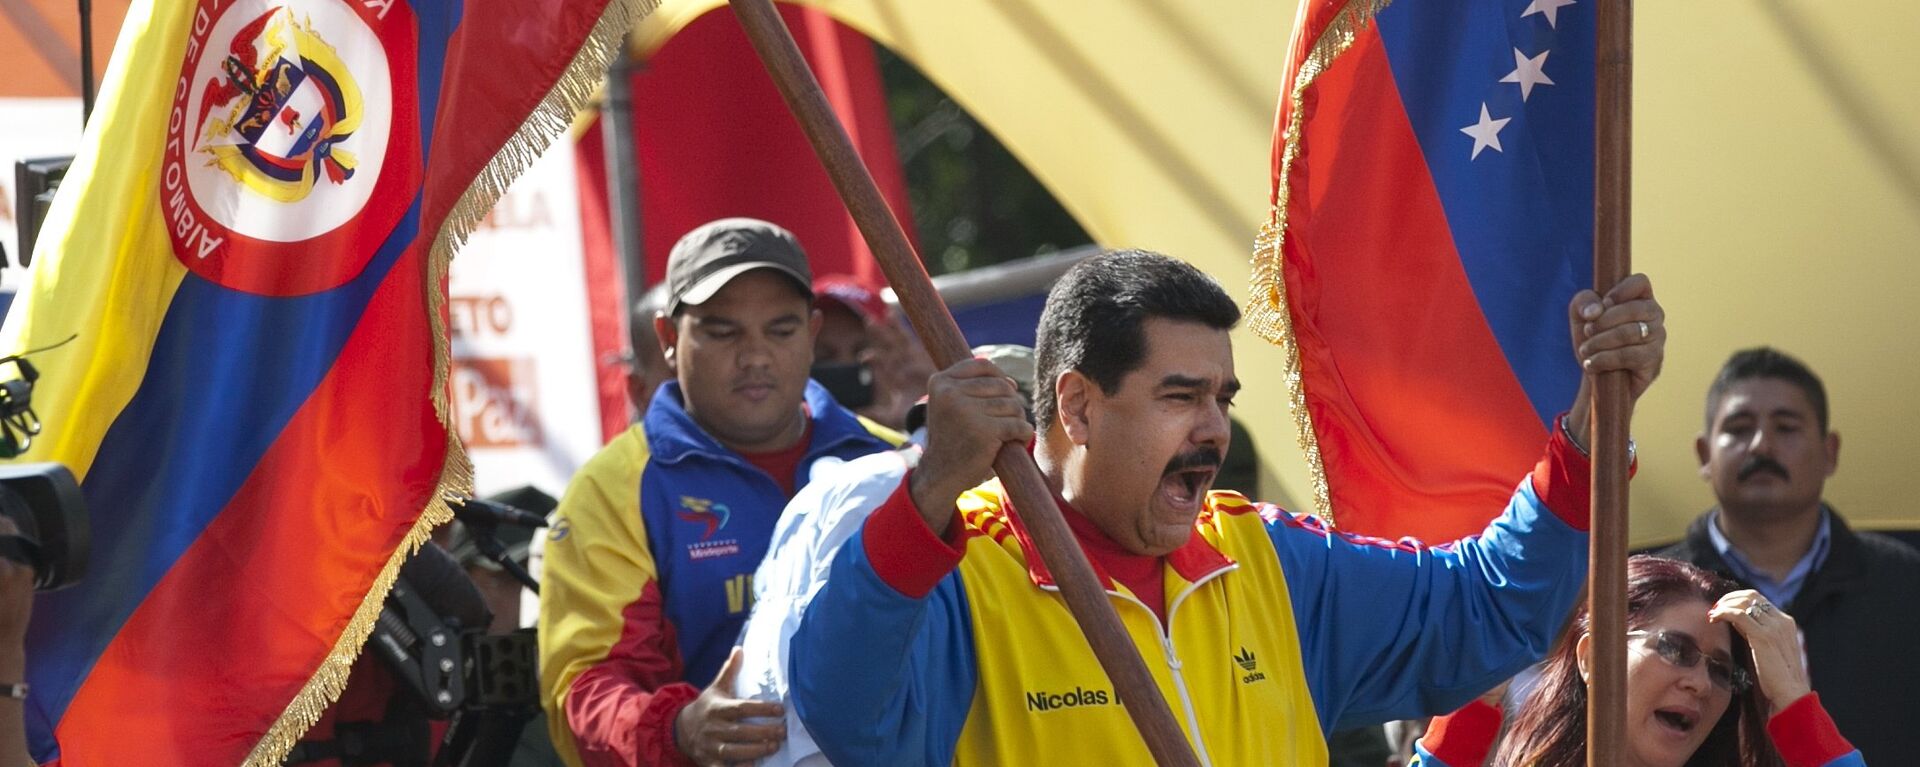 Venezuela's President Nicolas Maduro holds up a Colombian national flag, left, alongside his country's national flag, during a rally in support of closing the Colombian border, in Caracas, Venezuela, Friday, Aug. 28, 2015. - Sputnik Mundo, 1920, 08.08.2022